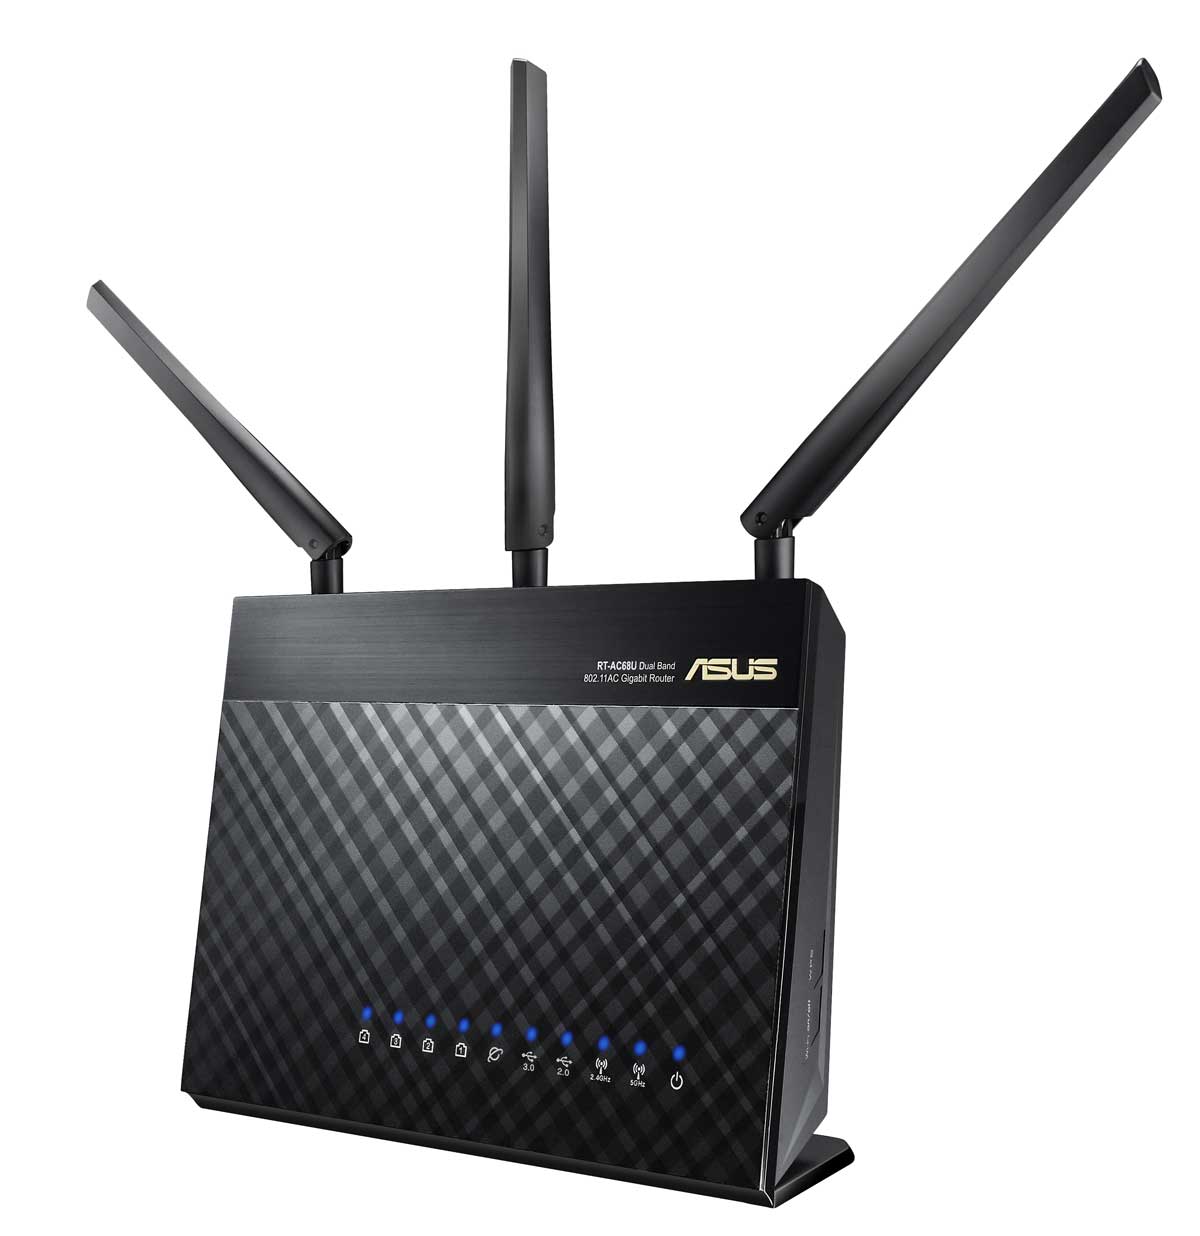 Skalk Understanding Be confused ASUS RT-AC68U Review - High Speed Wi-Fi Router | Tom's Guide